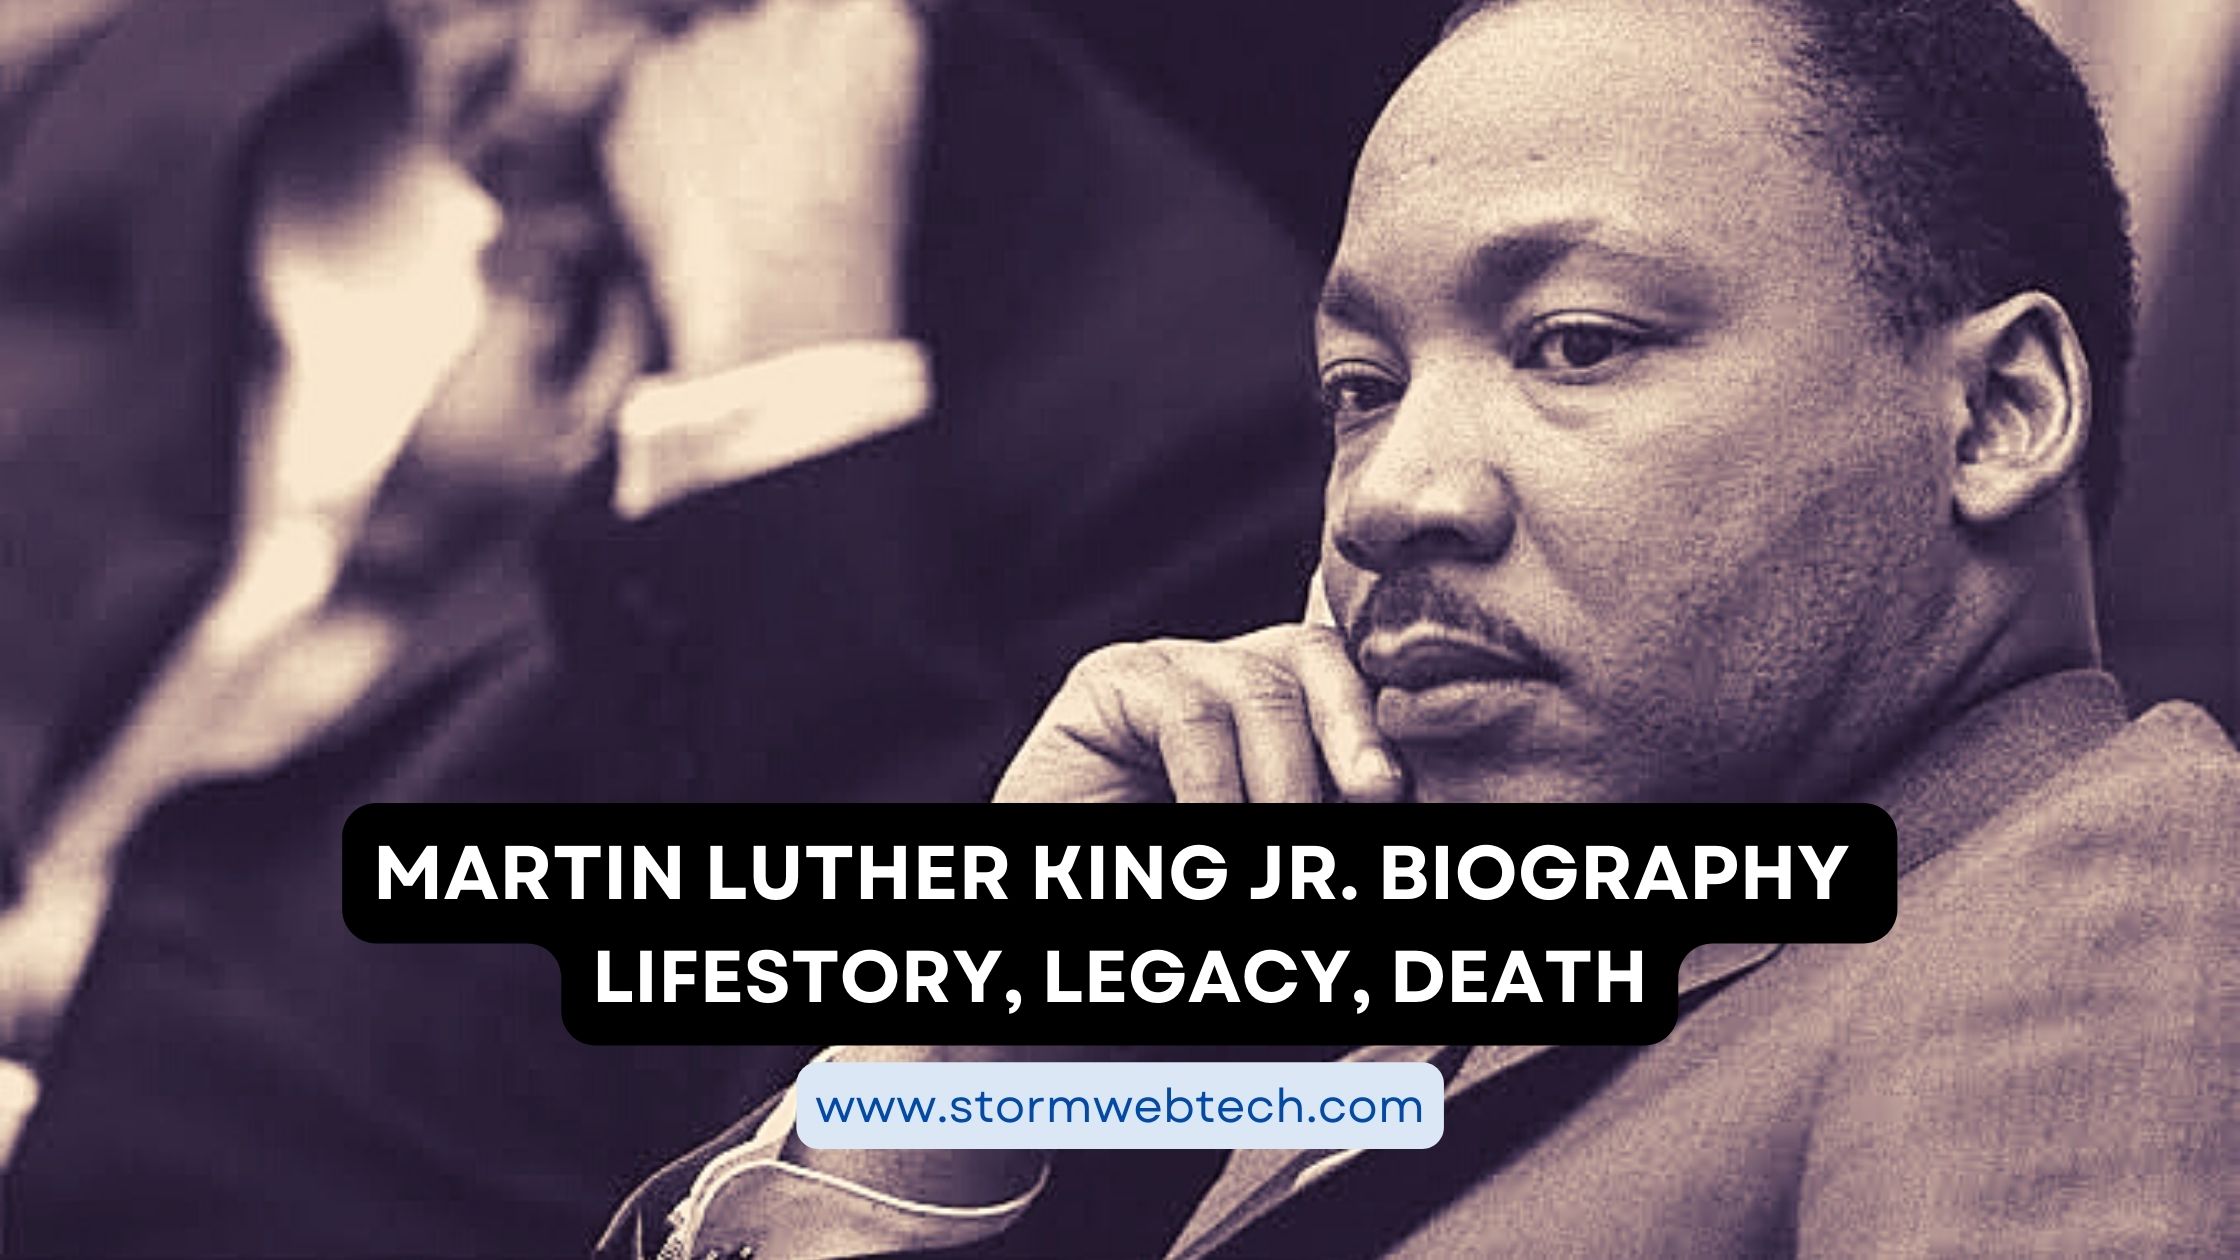 Martin Luther King Jr. Biography, Martin Luther King Jr. Early Life and Education, assassination of martin luther king jr., martin luther king jr. legacy